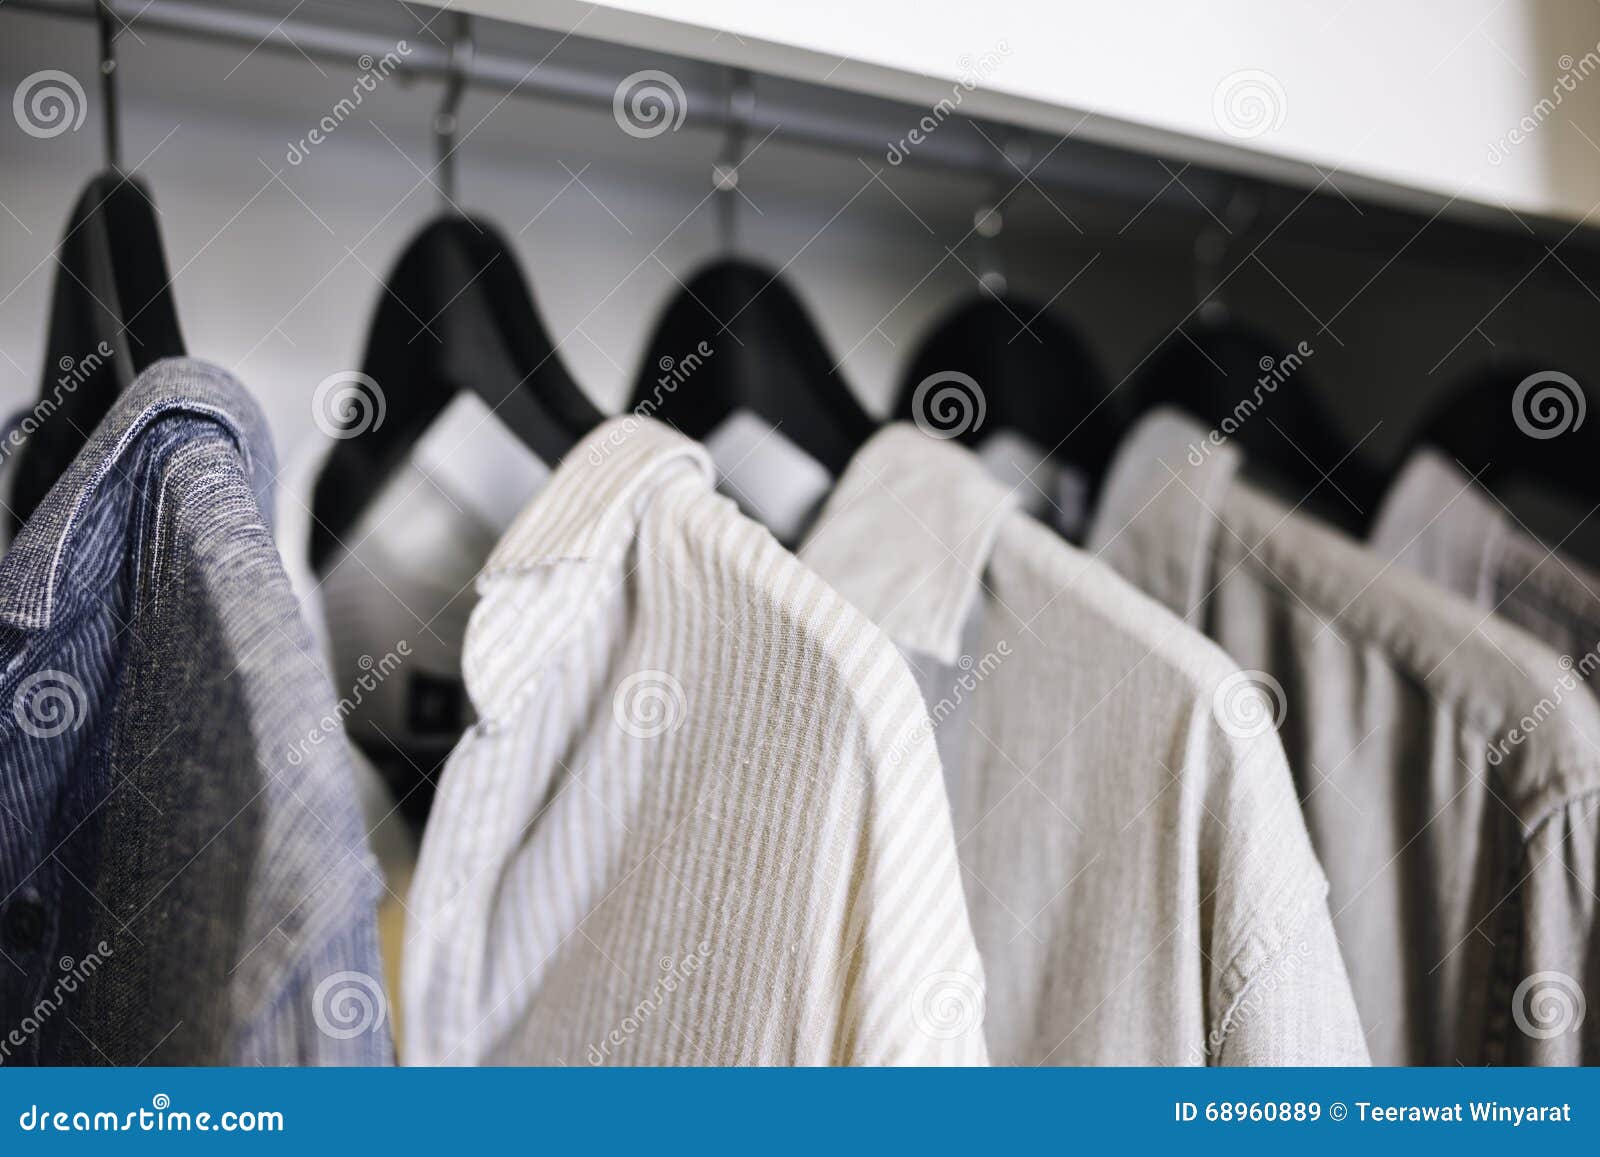 clothes hanging in closet shop fashion display